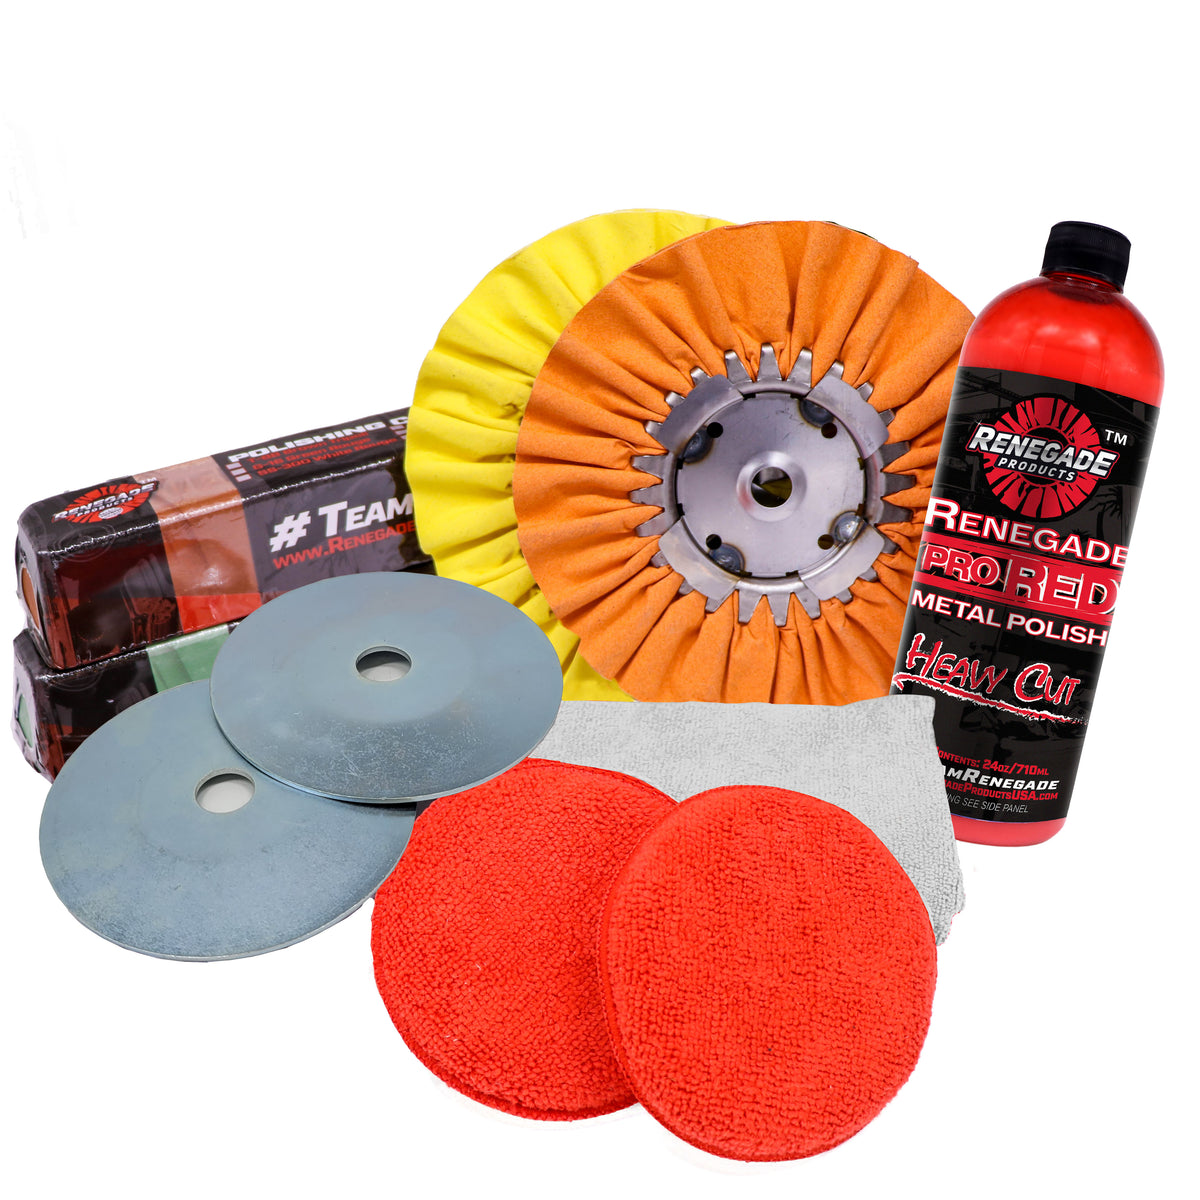 Renegade Products USA Aluminum Mini Kit for Metal Polishing &amp; Buffing - Assorted Items for Complete Aluminum Surface Care and Restoration